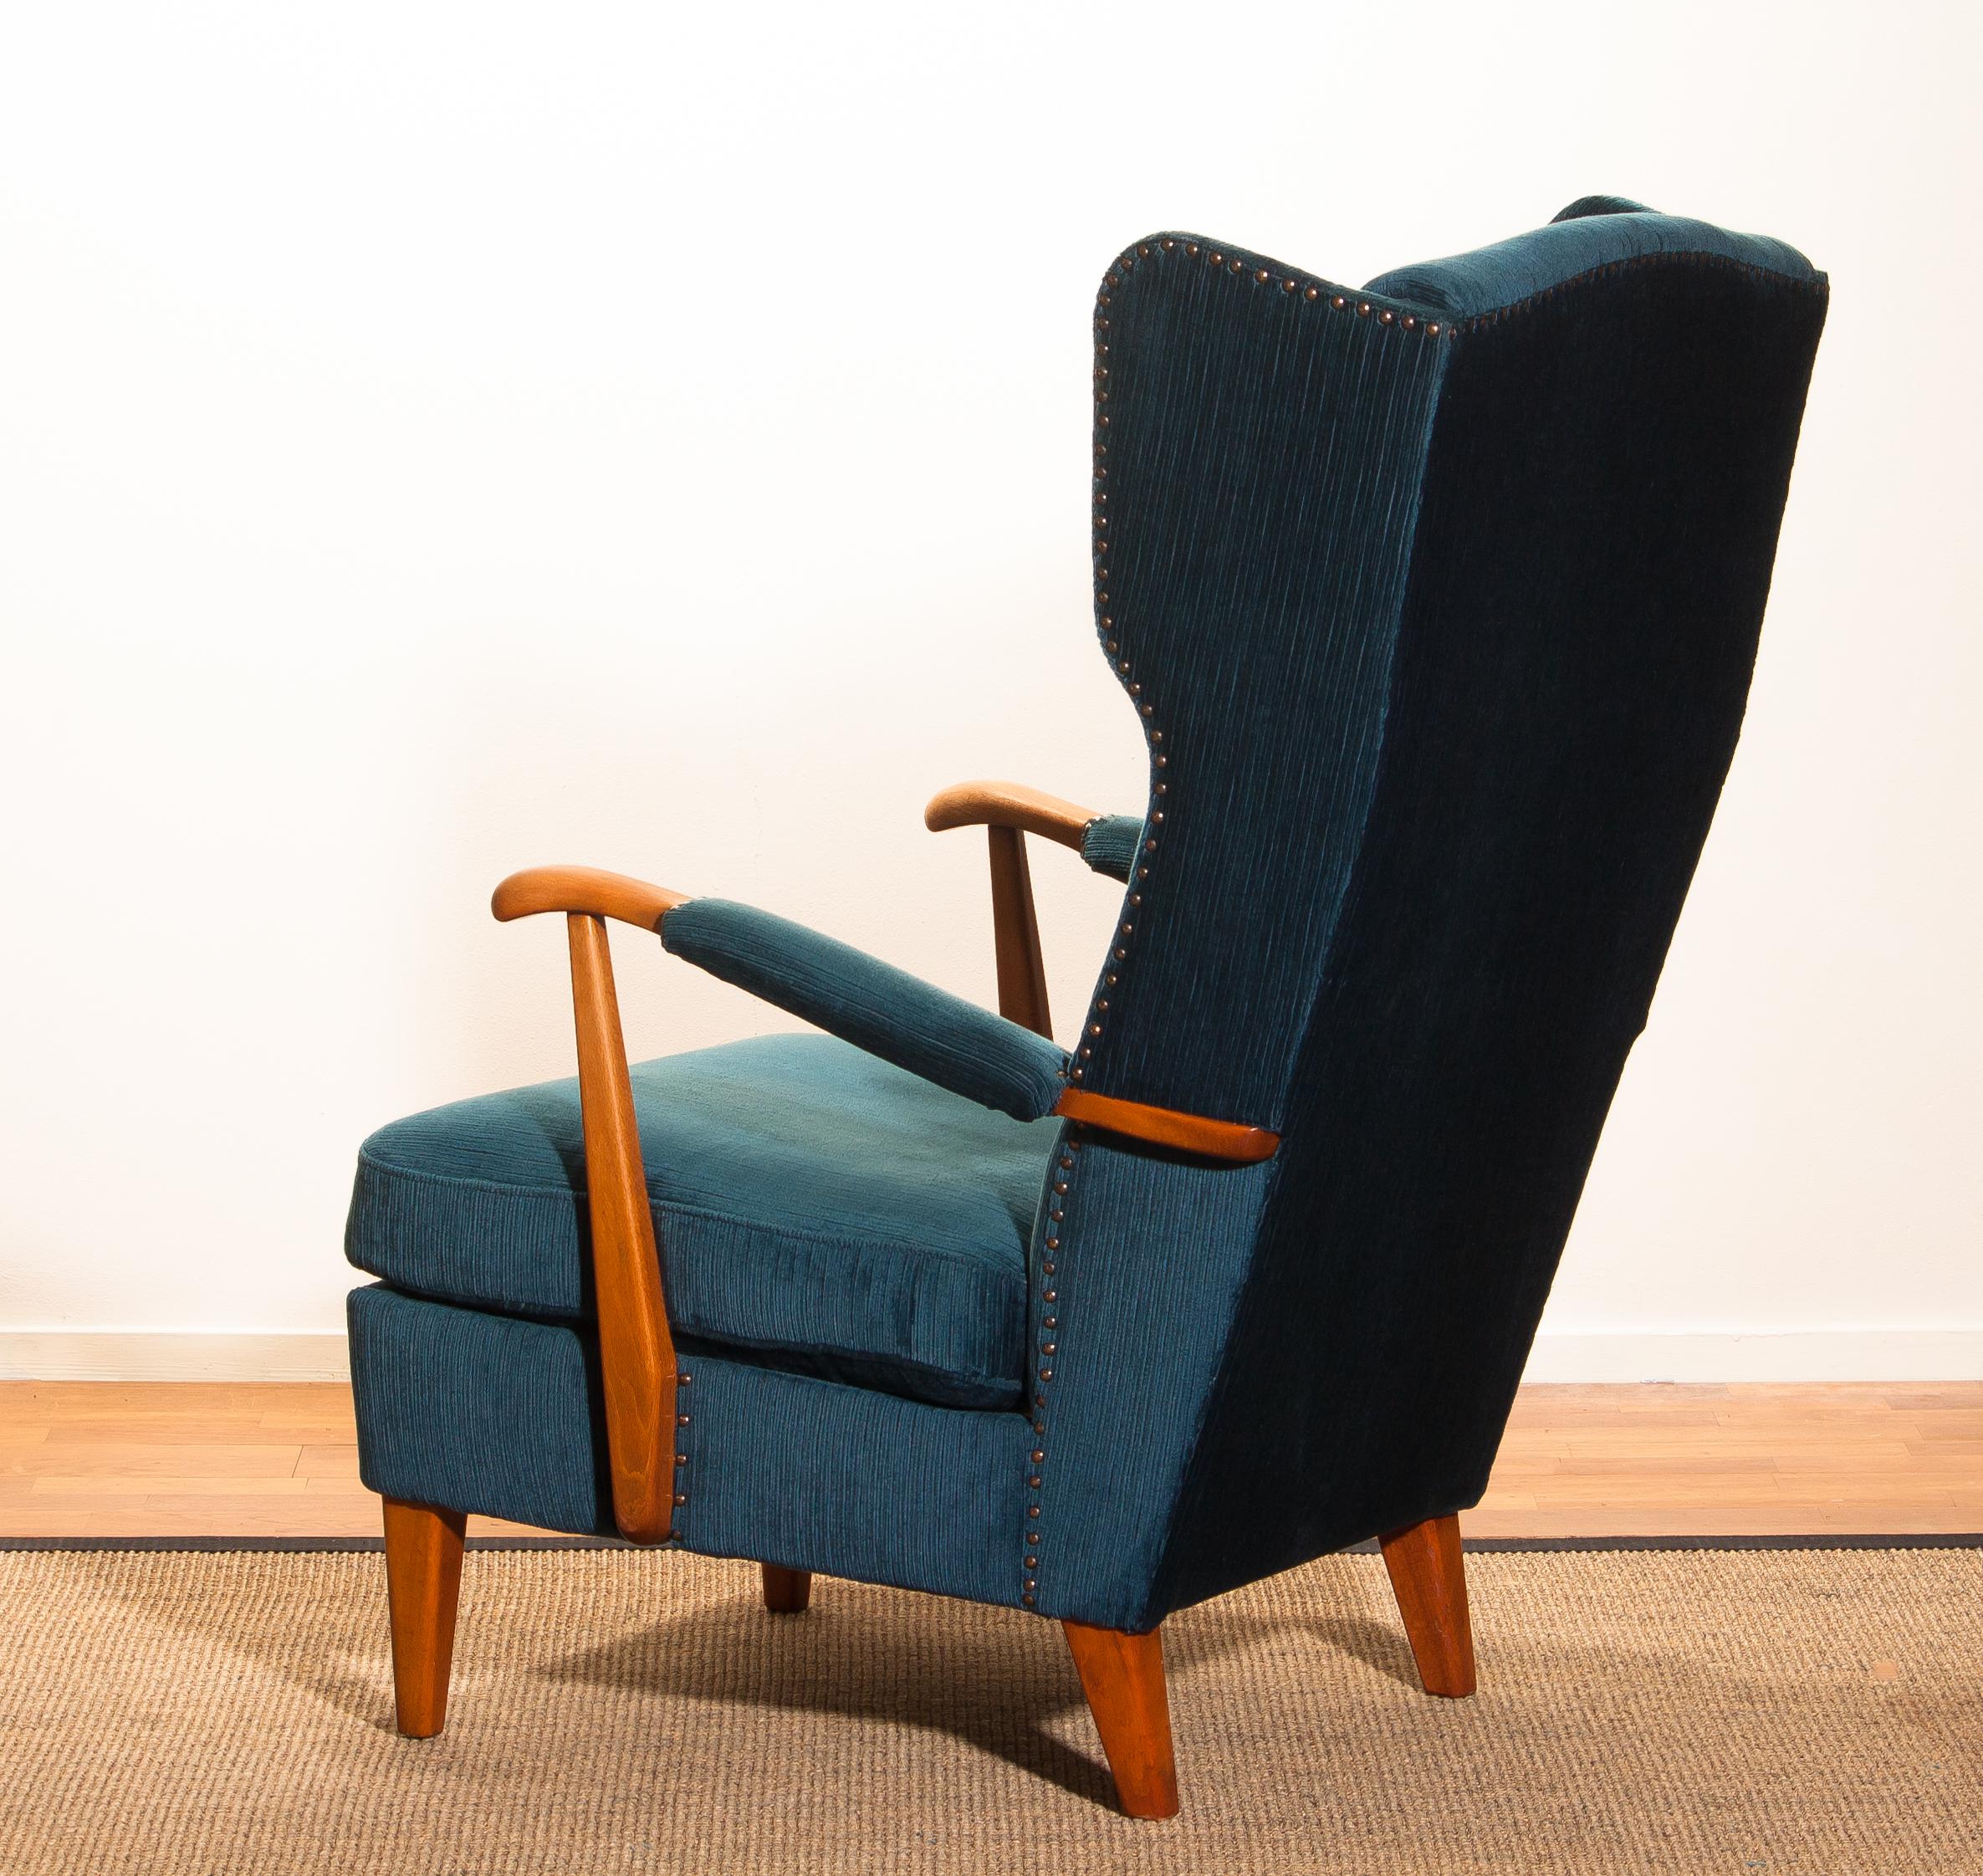 Knolls Moderna Lounge or Wingback Chair in Petrol Rib Velours, 1950s, Sweden 1